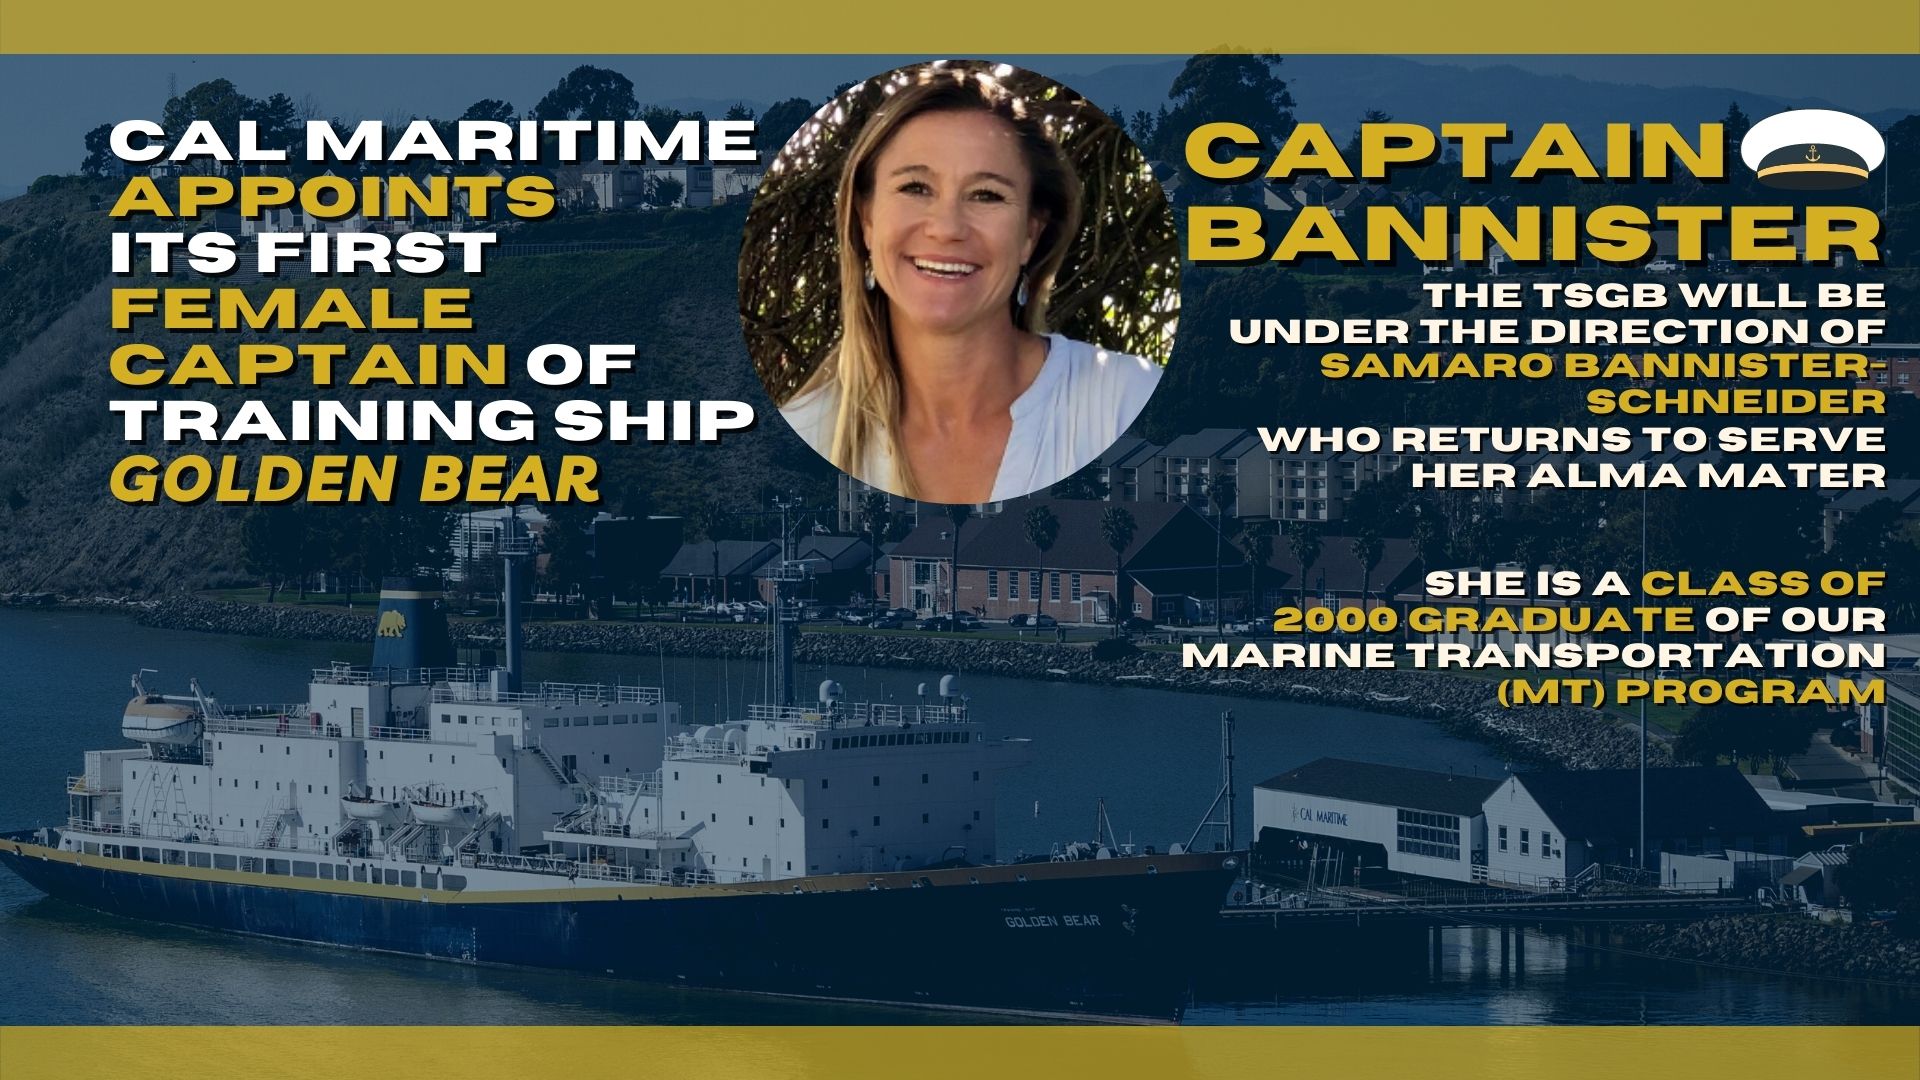 Cal Maritime Appoints New Training Ship Captain